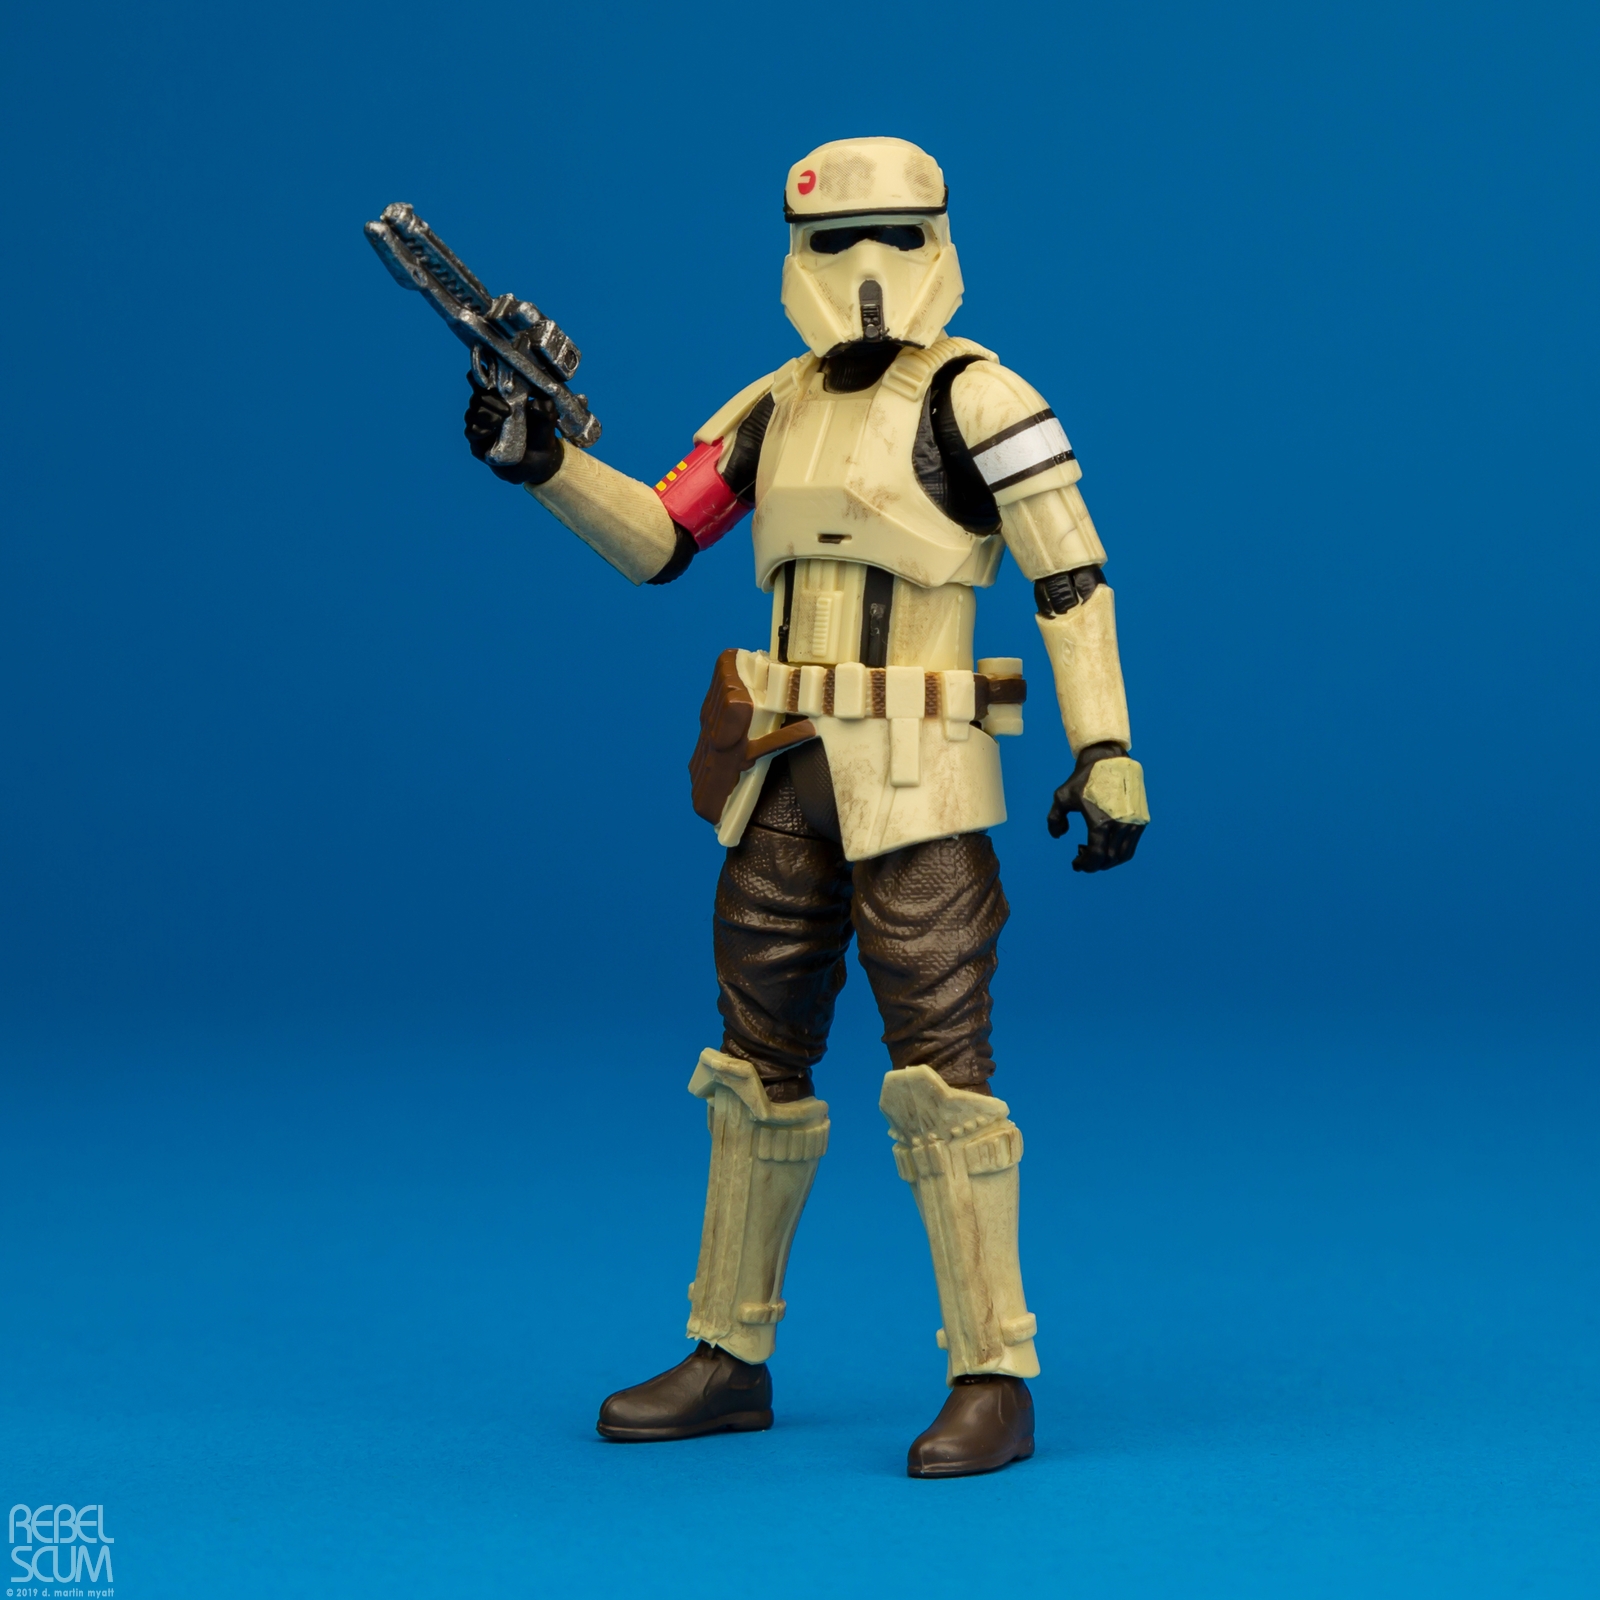 VC133-Scarif-Stormtrooper-The-Vintage-Collection-Hasbro-008.jpg